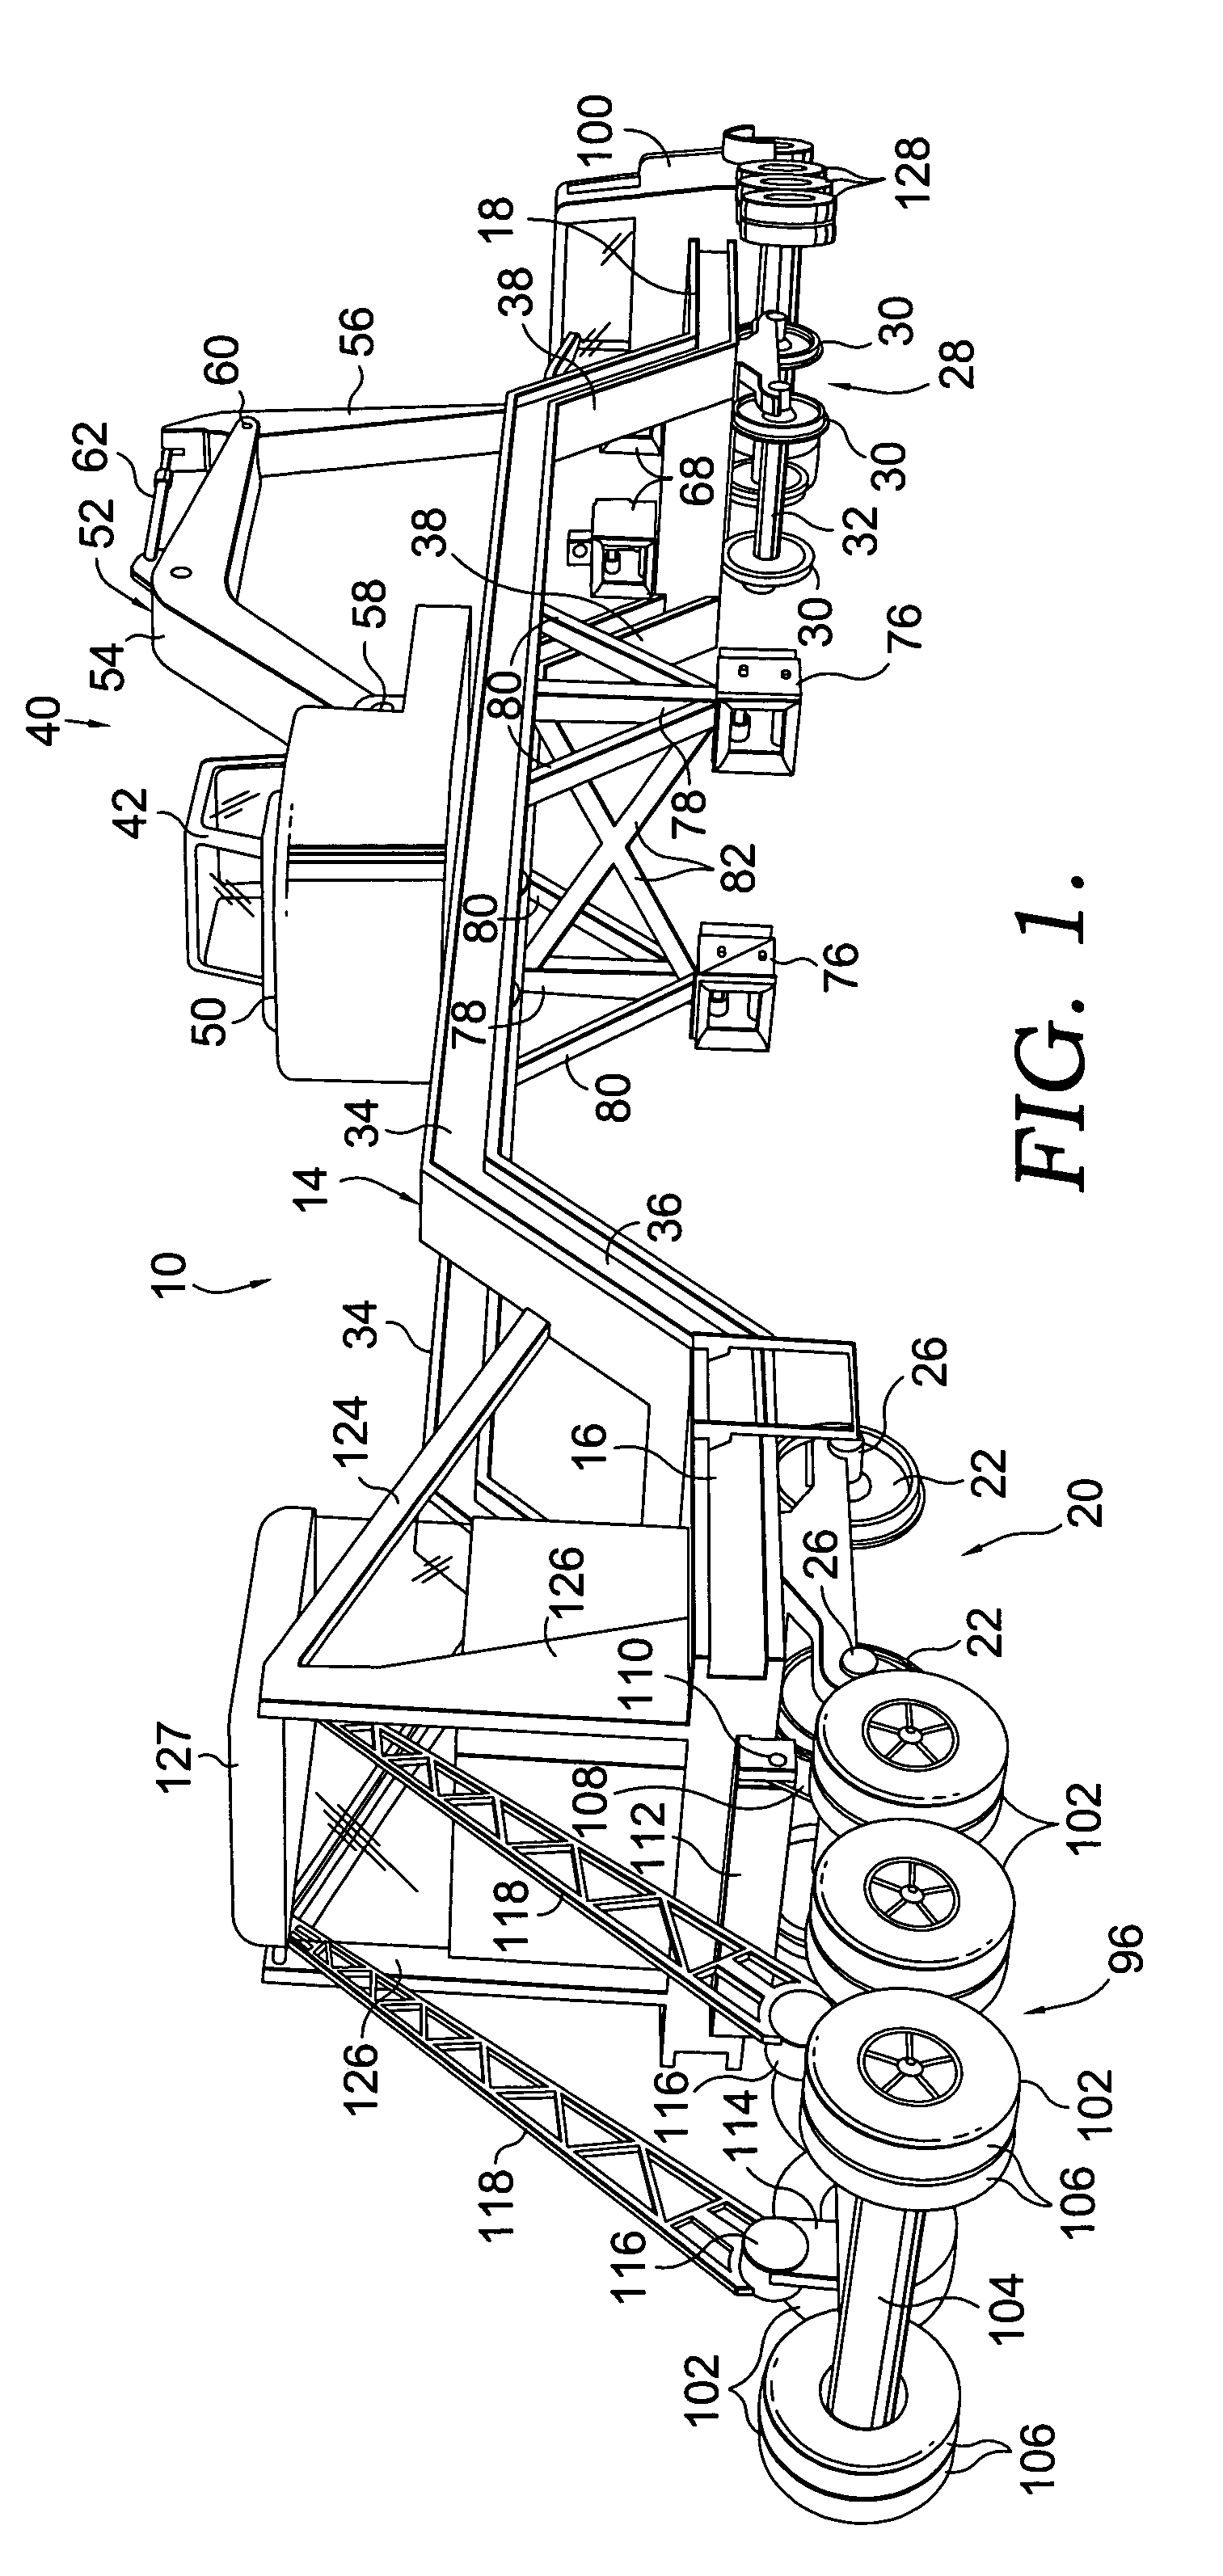 Method and apparatus for unloading ribbon rails from rail cars